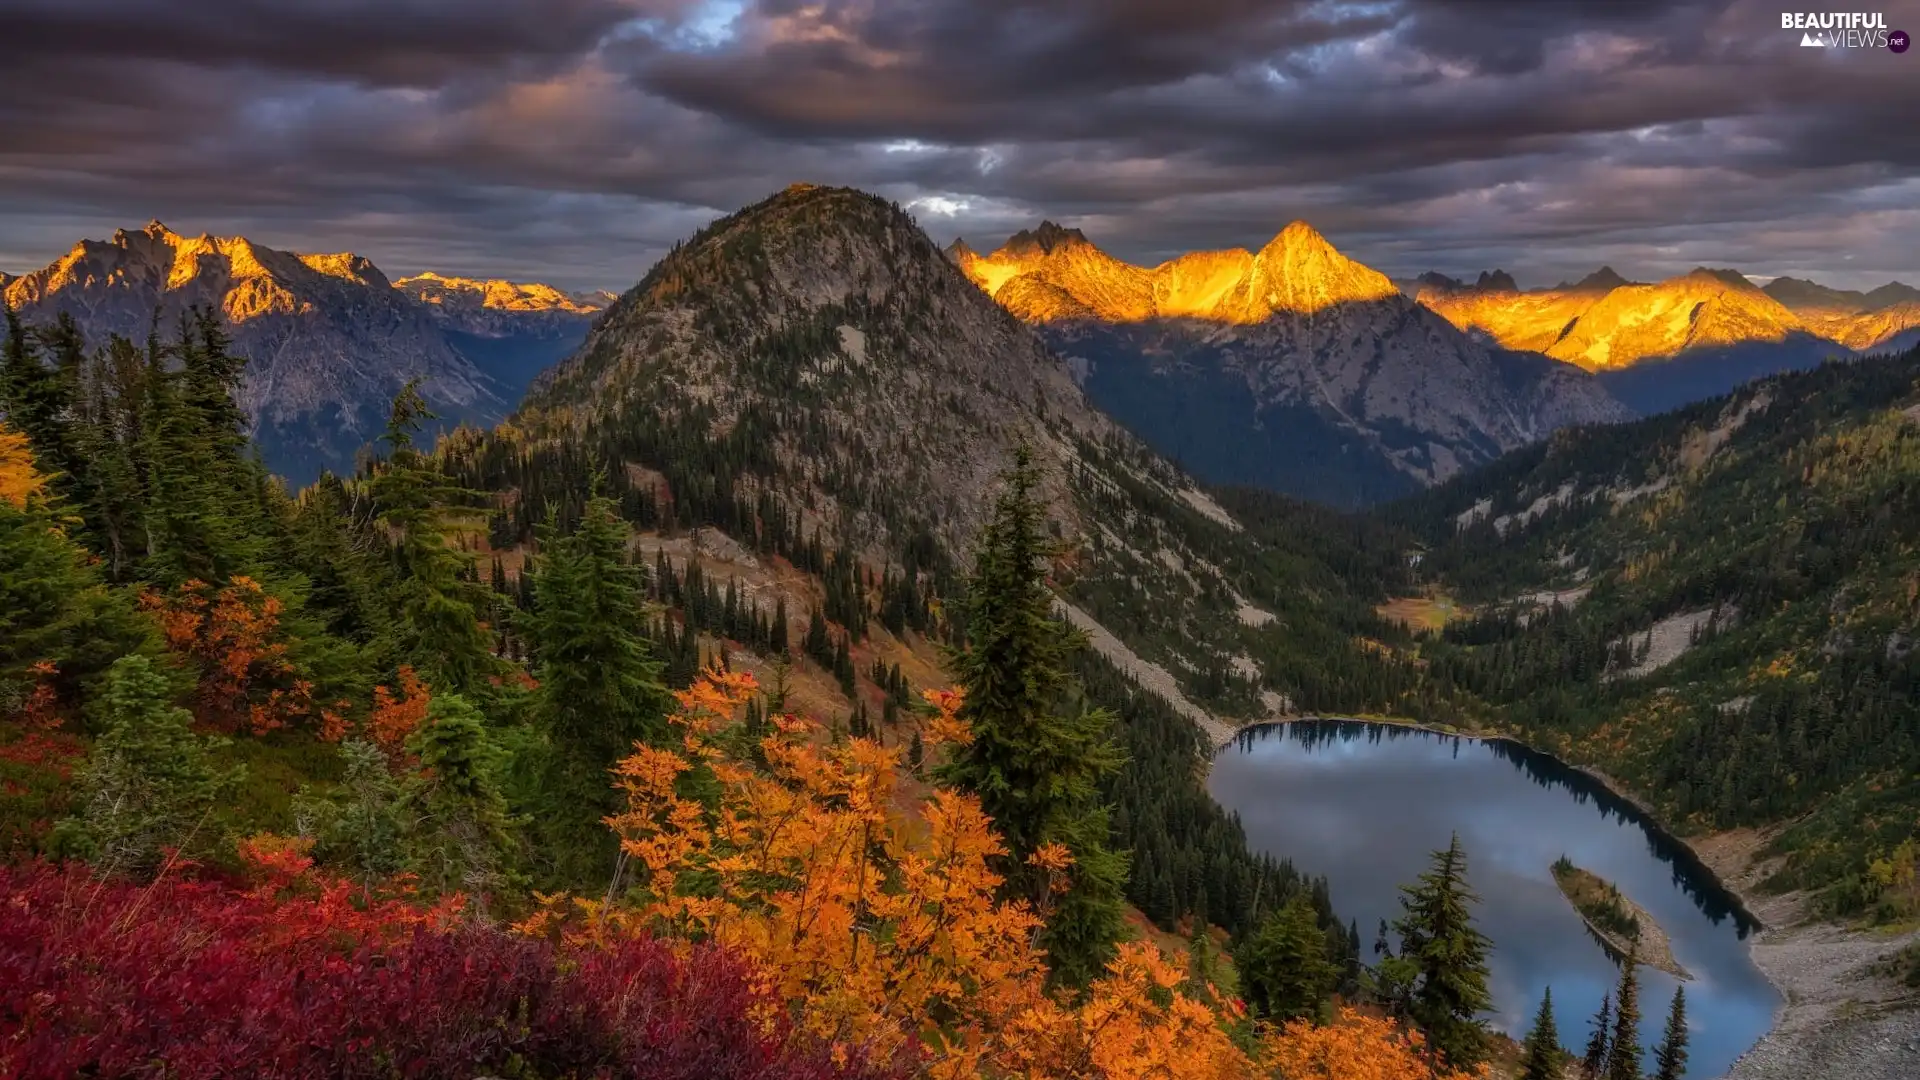 viewes, lake, Plants, trees, Mountains, autumn, clouds